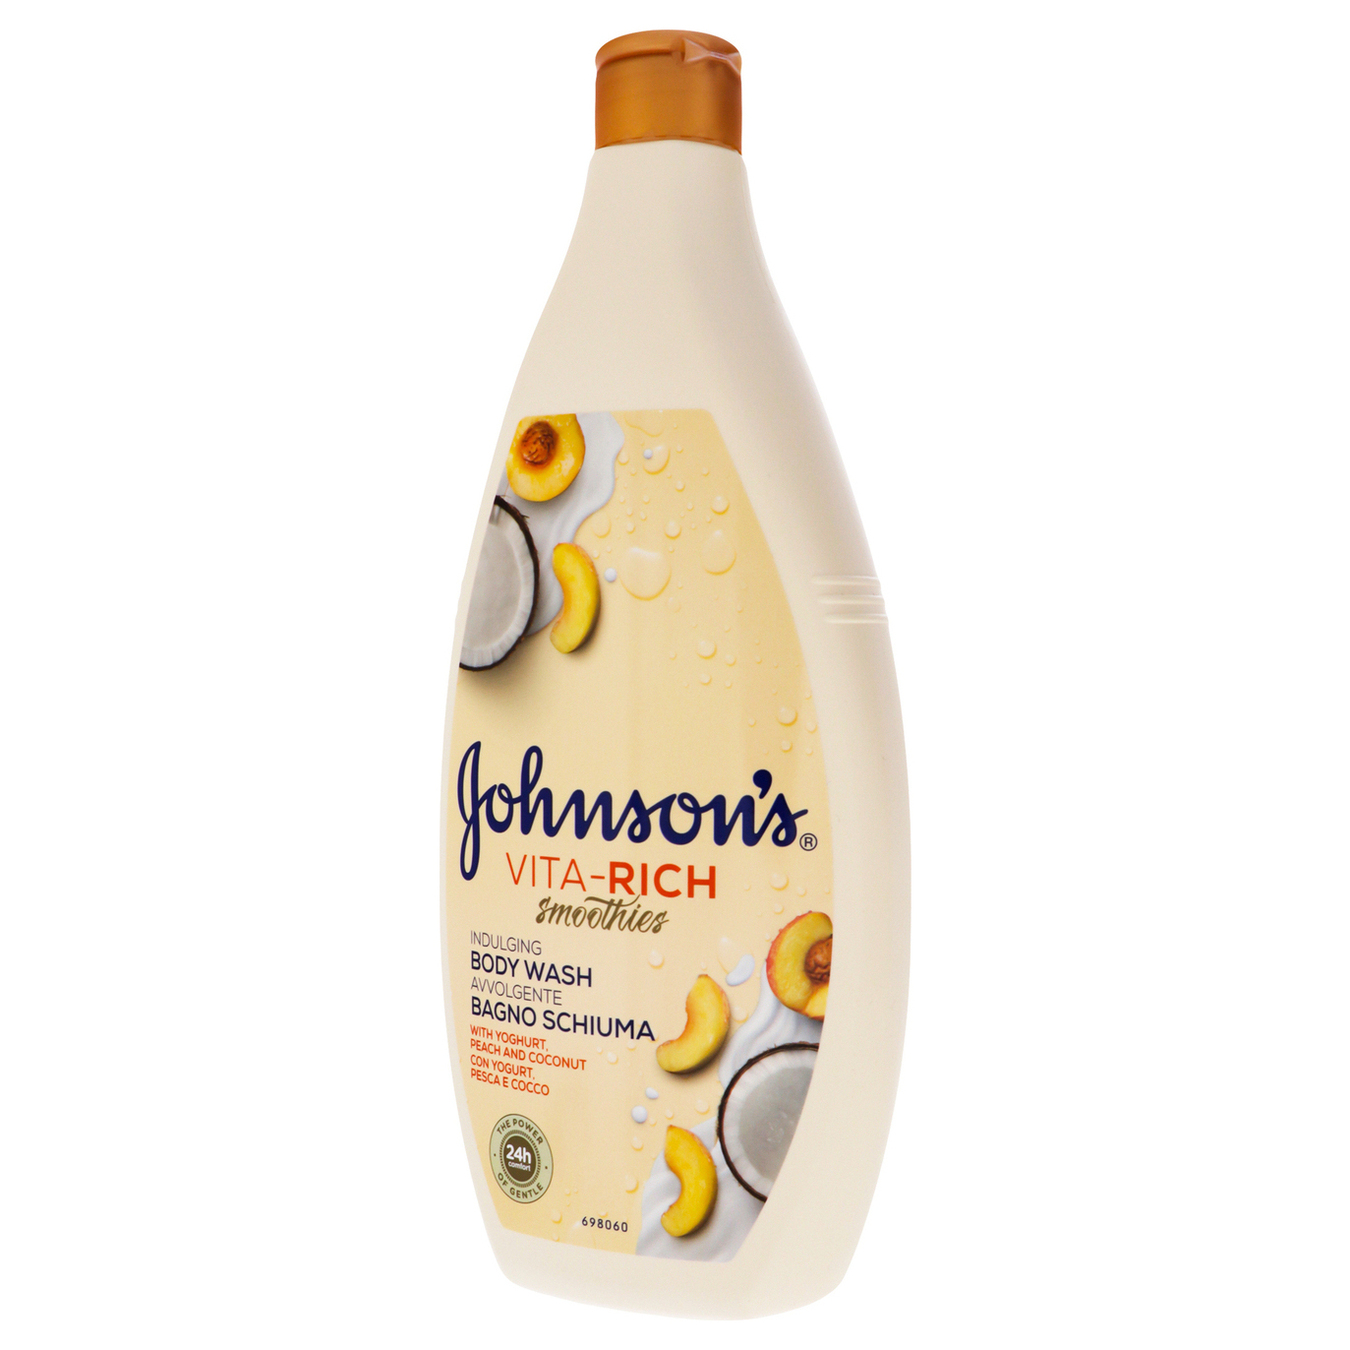 Shower gel Johnson's Vita-Rich Smoothie Relaxing with coconut yogurt and peach extract 750ml 2